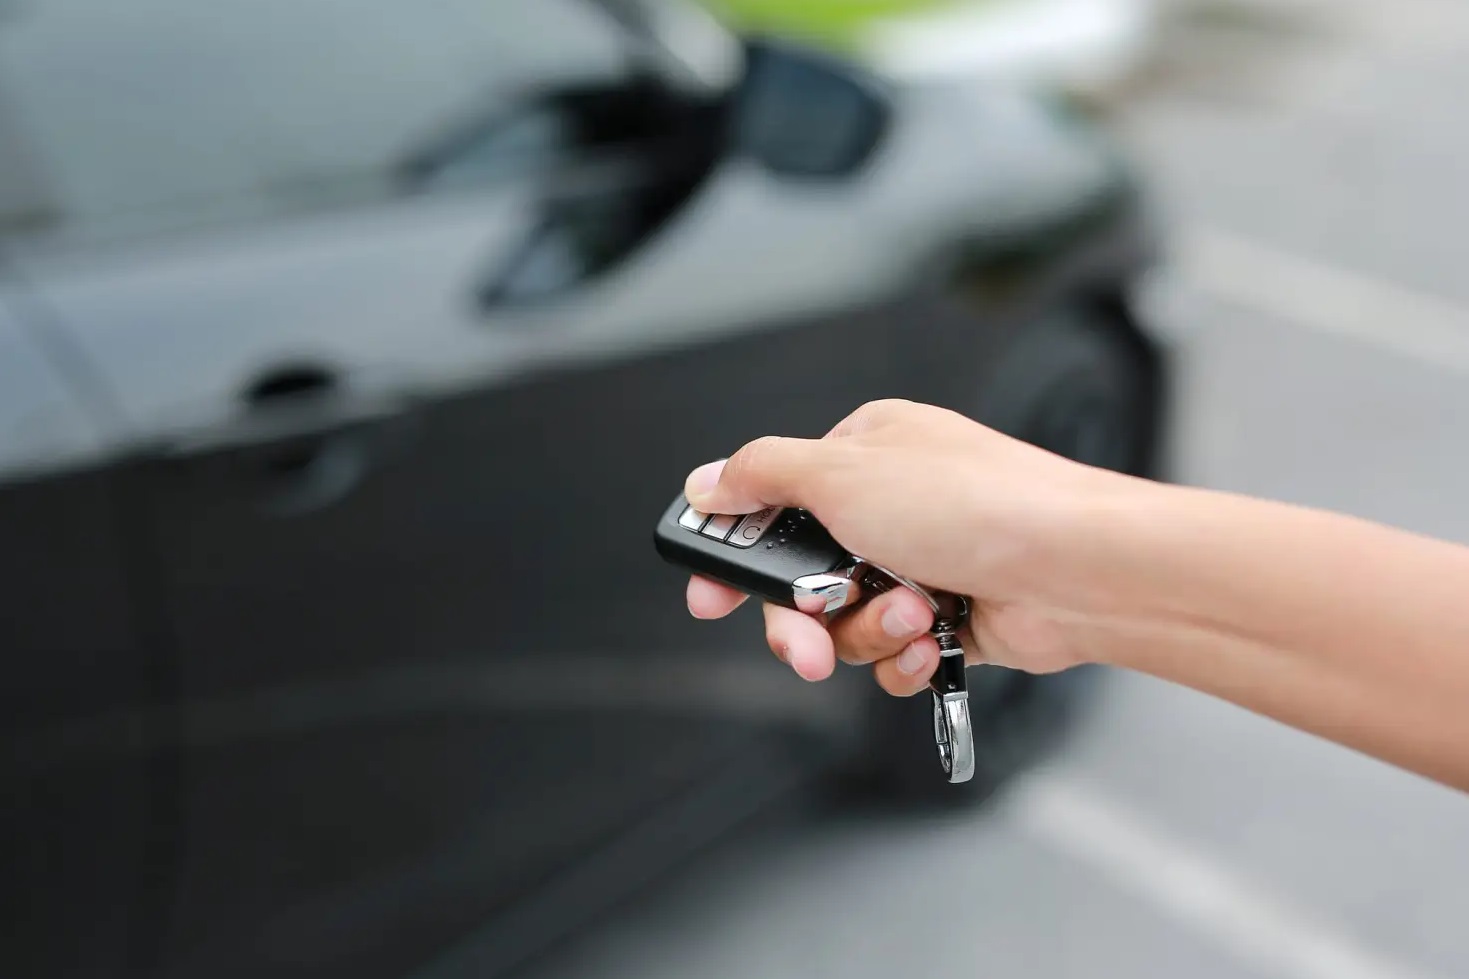 5 Causes of Car Remote Not Working and Solutions